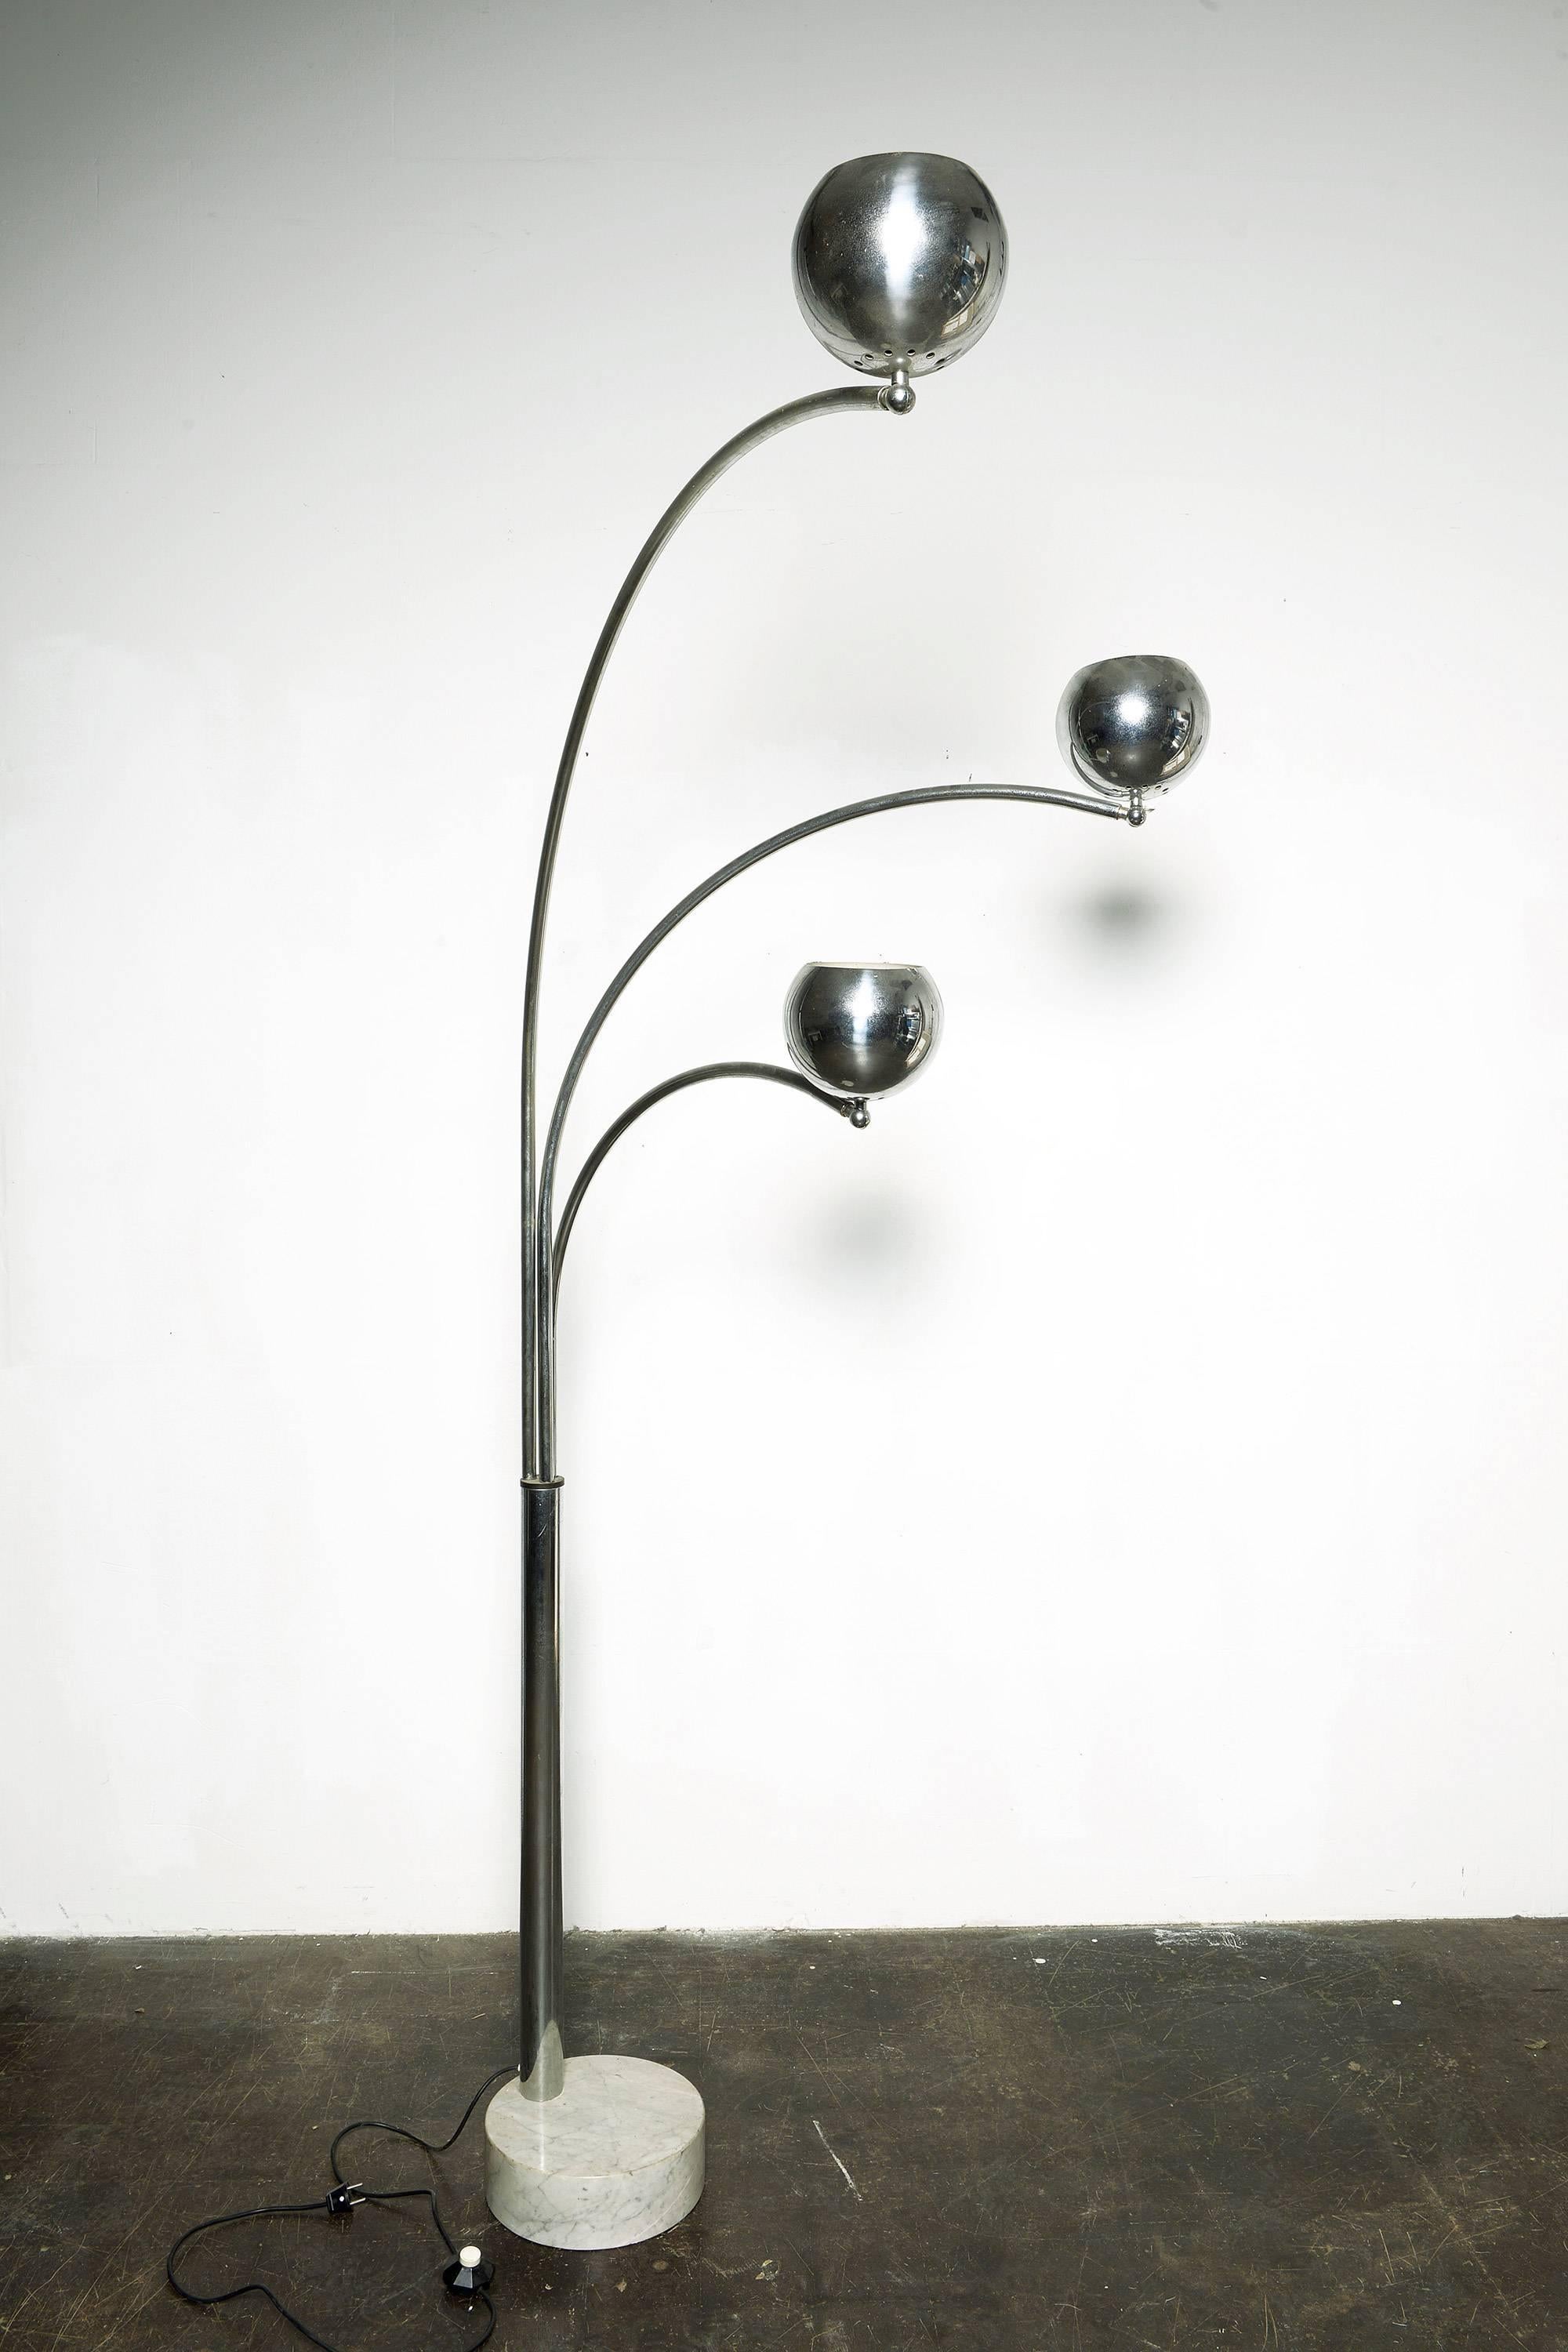 Beautiful arc floor lamp with a marble base by Goffredo Reggiani. The three lamp bowls are revolving.
Some patina on the chrome bowls but in good vintage condition.